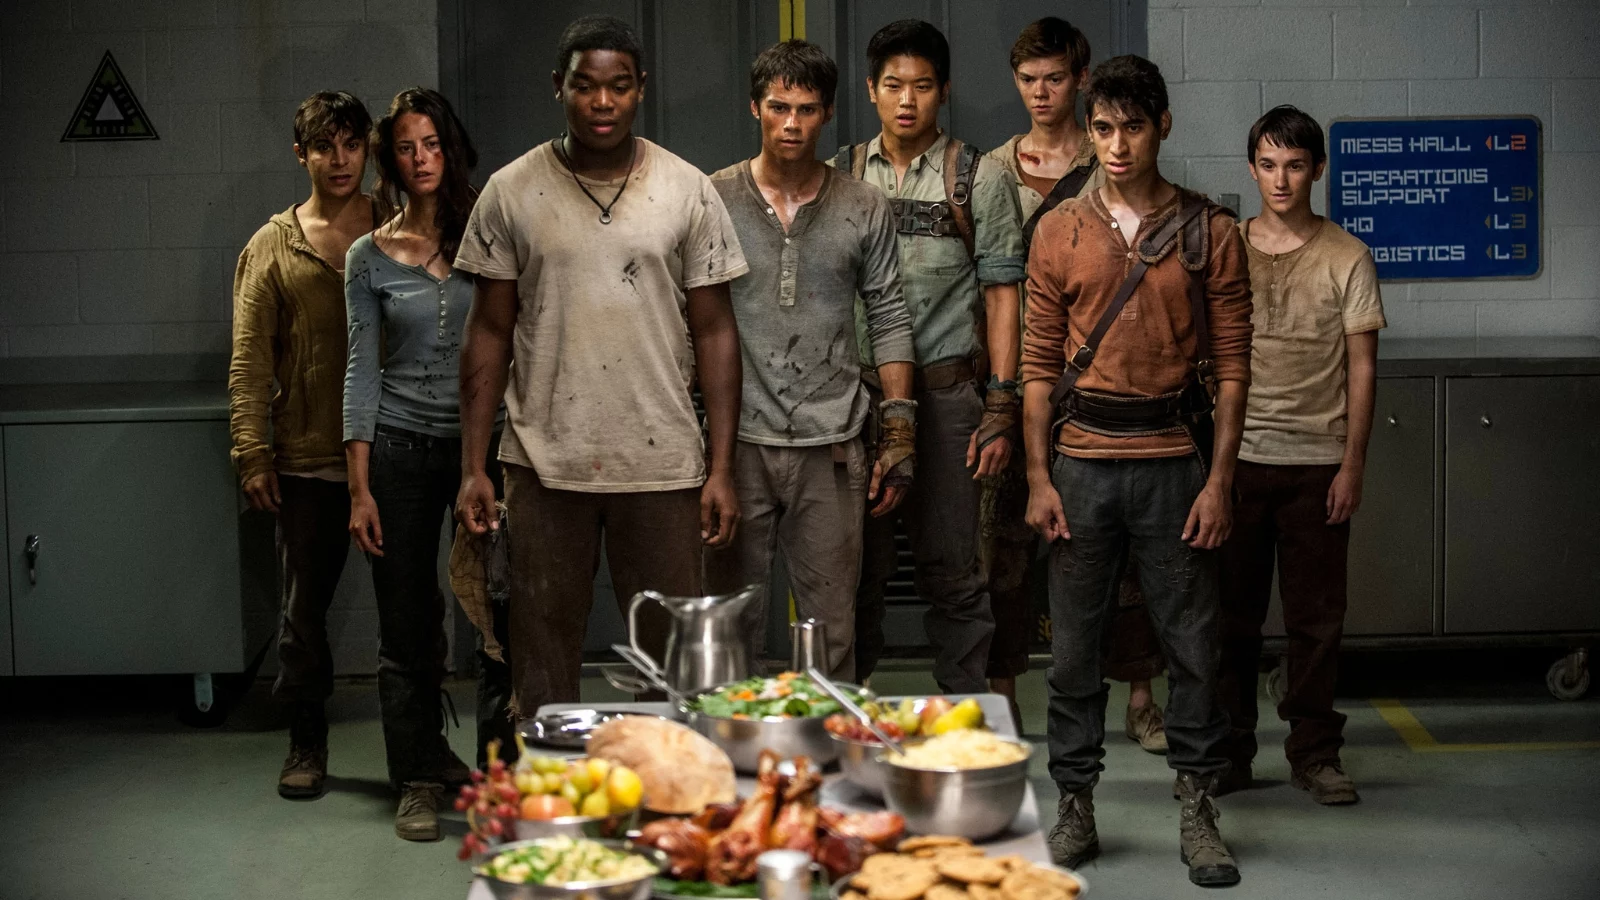 A still from the movie "The Maze Runner: Scorch Trials."